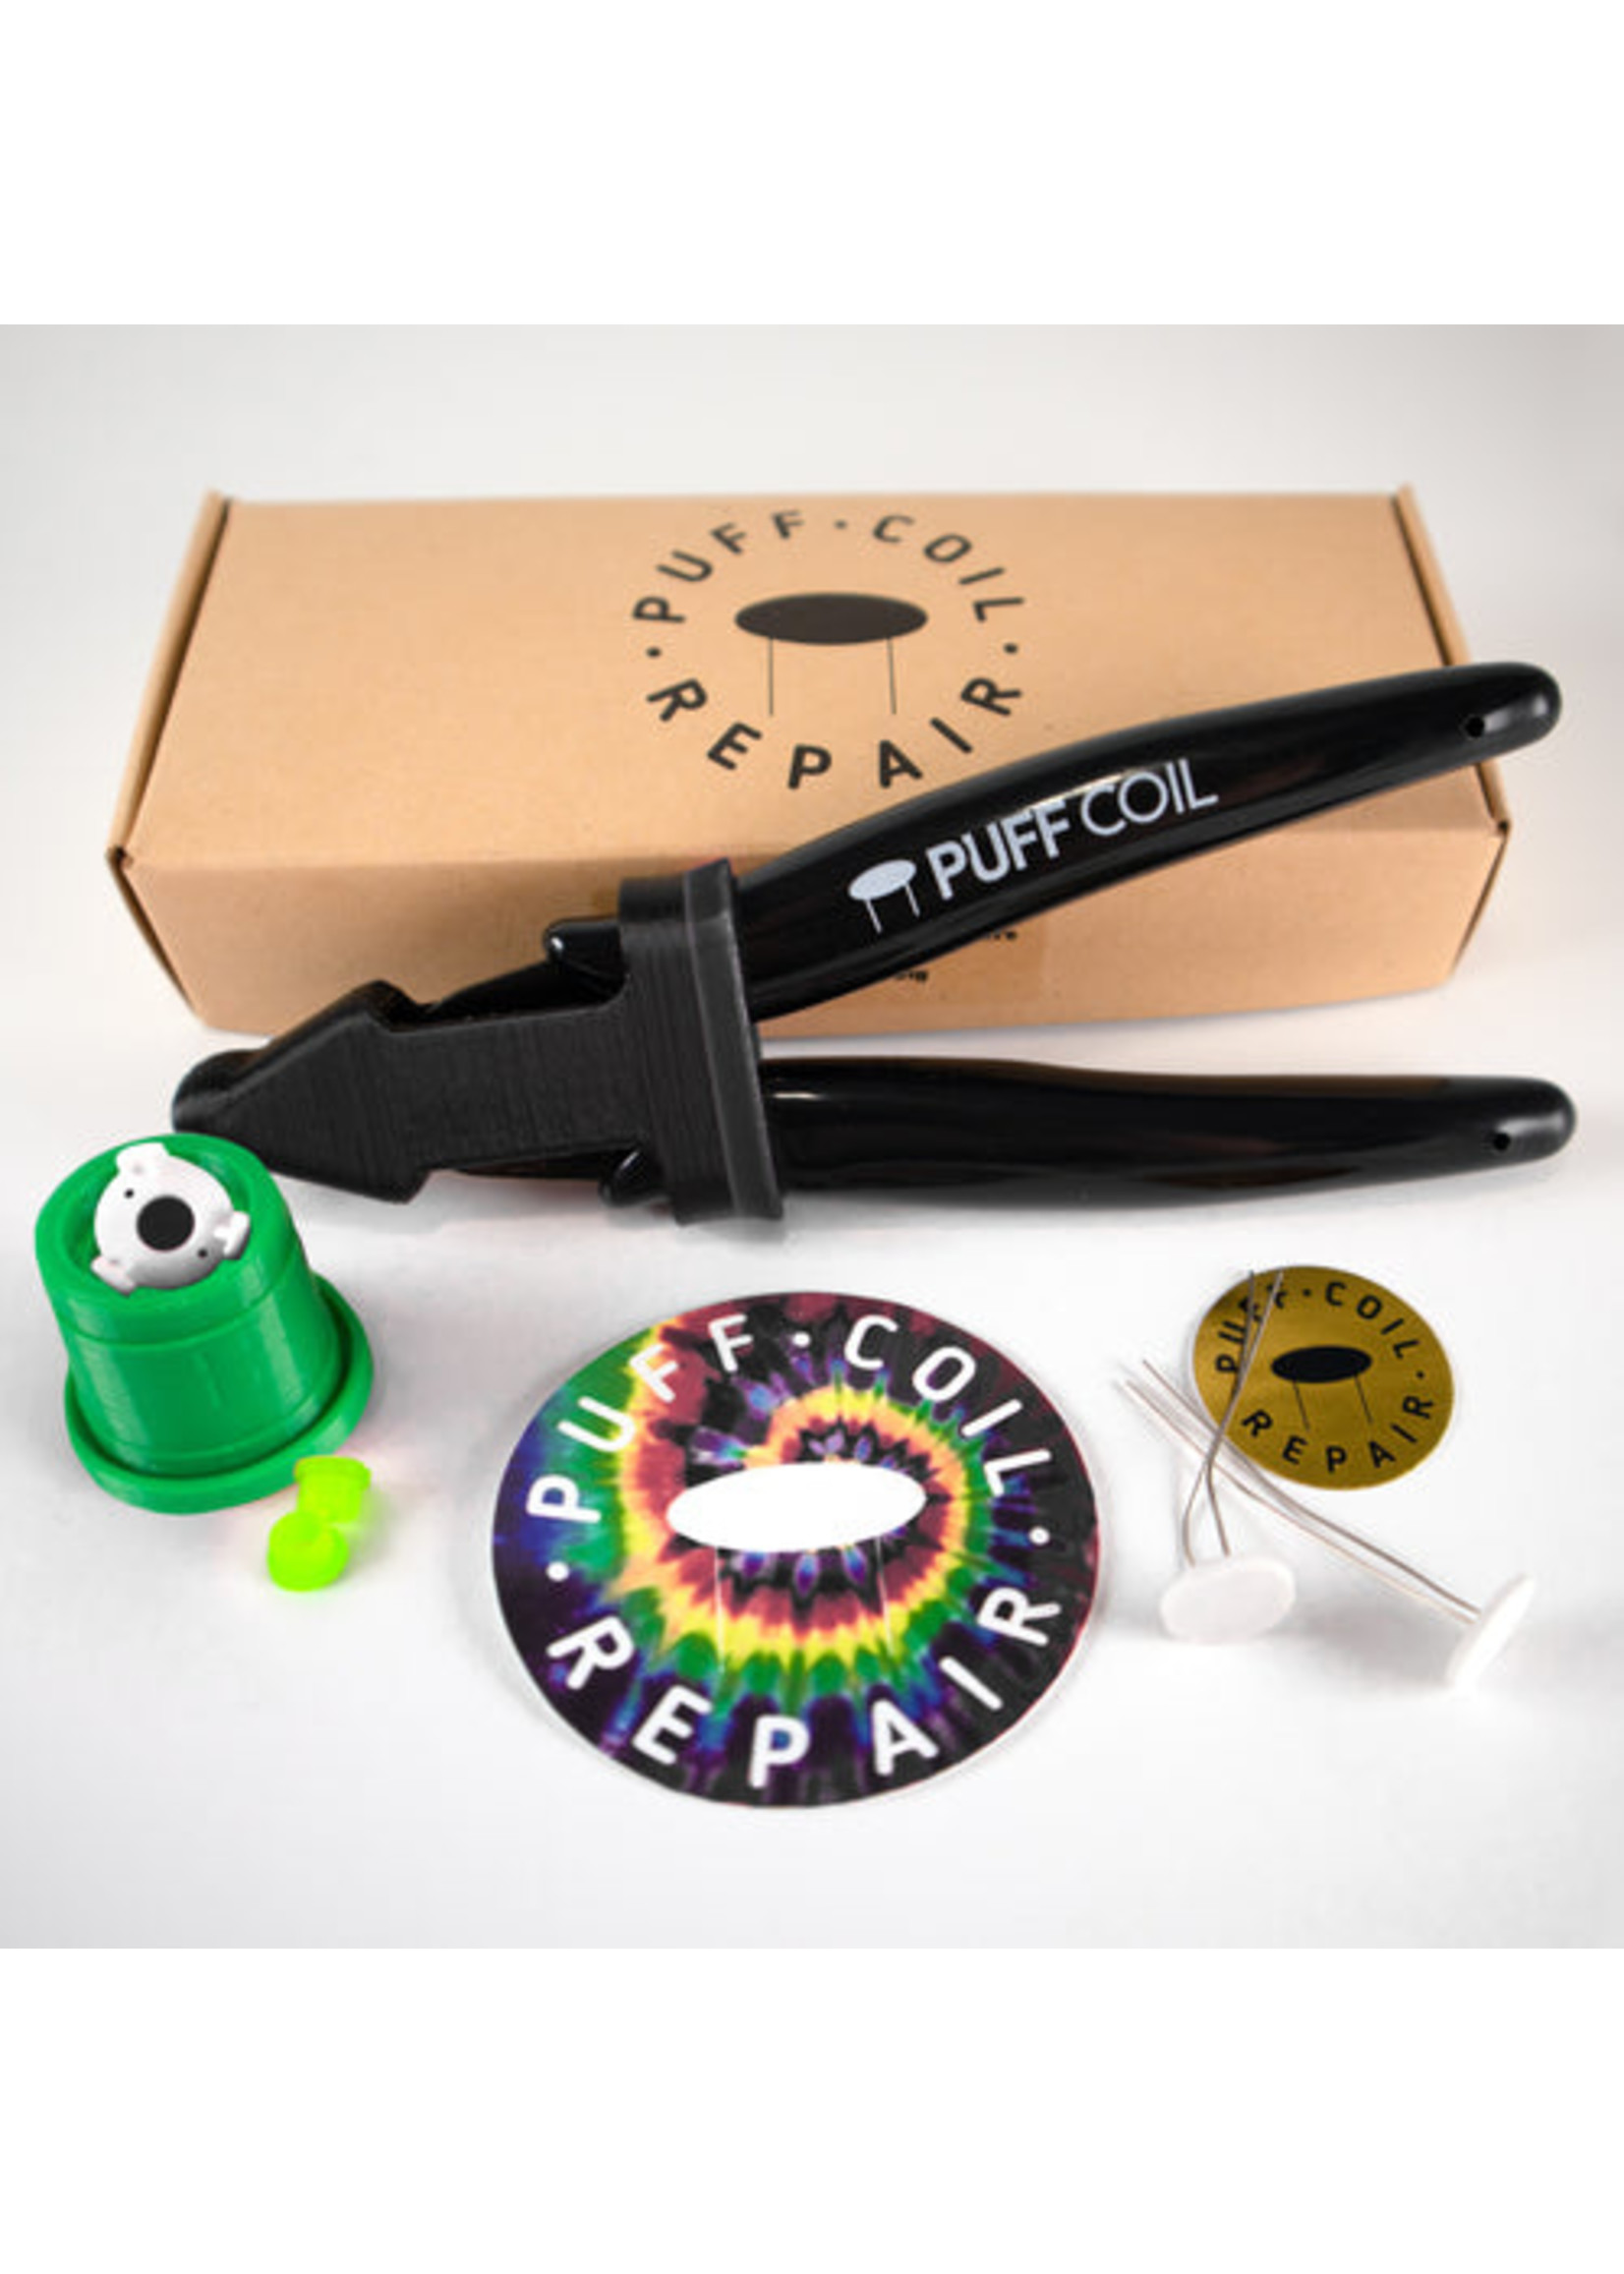 Puff Coil Puff Coil Starter Kit for Puffco Peak Atomizer